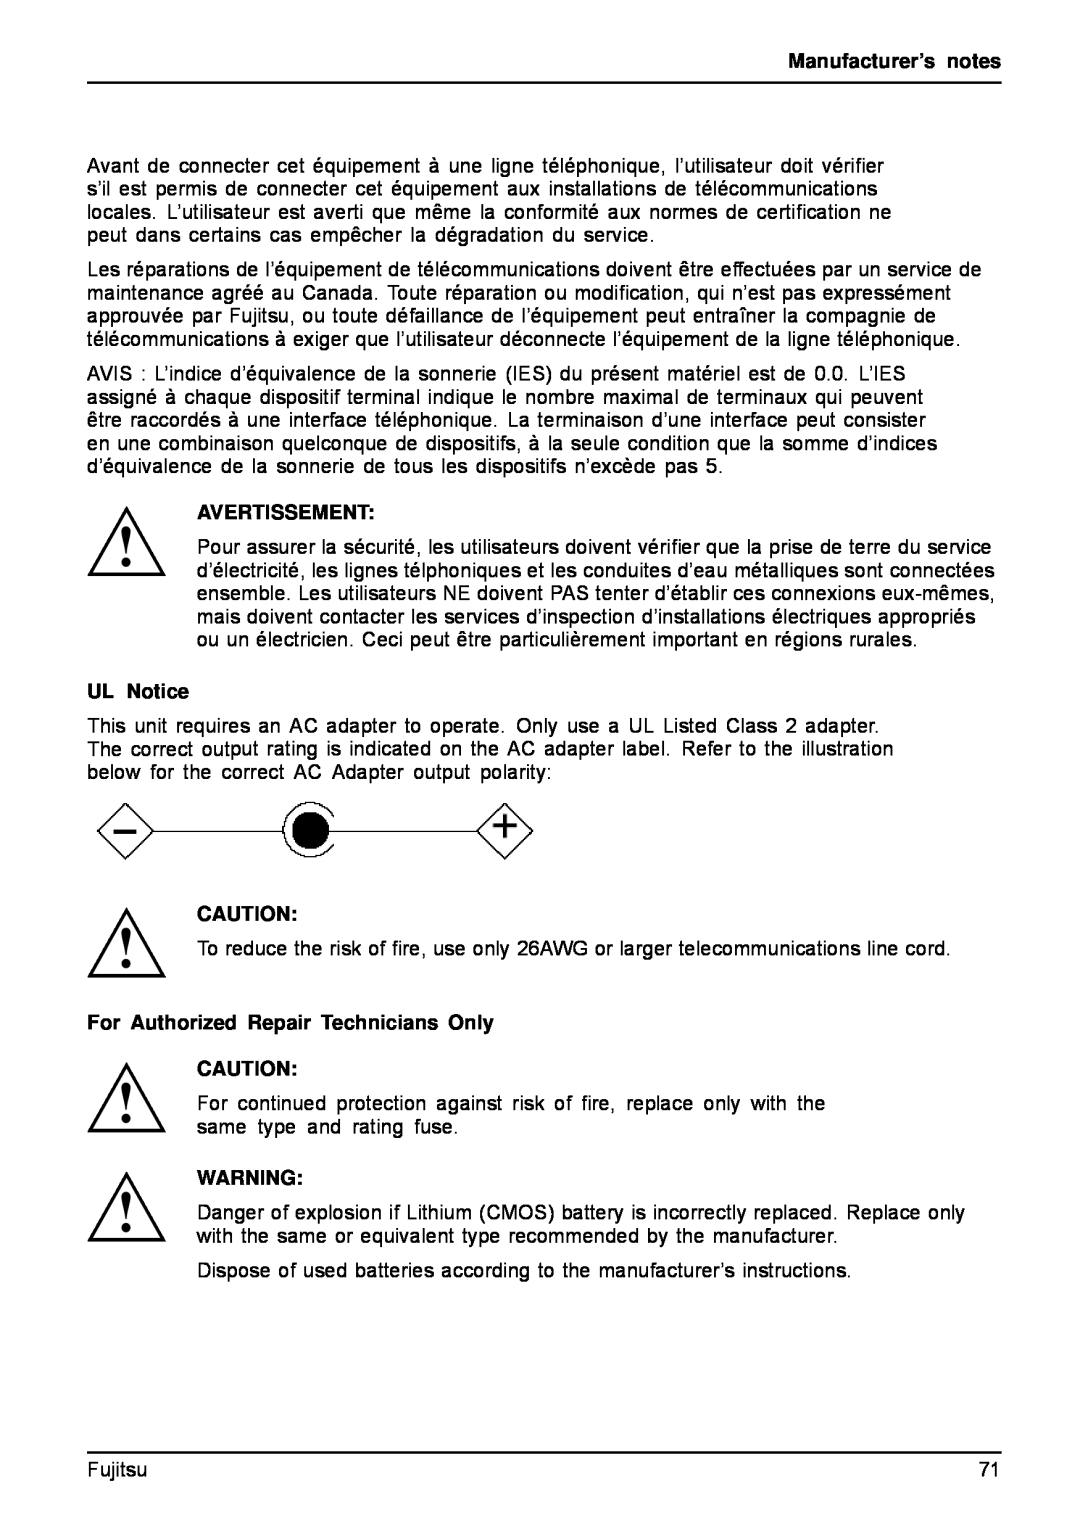 Fujitsu A512, AH512 manual Manufacturer’s notes, Avertissement, UL Notice, For Authorized Repair Technicians Only 